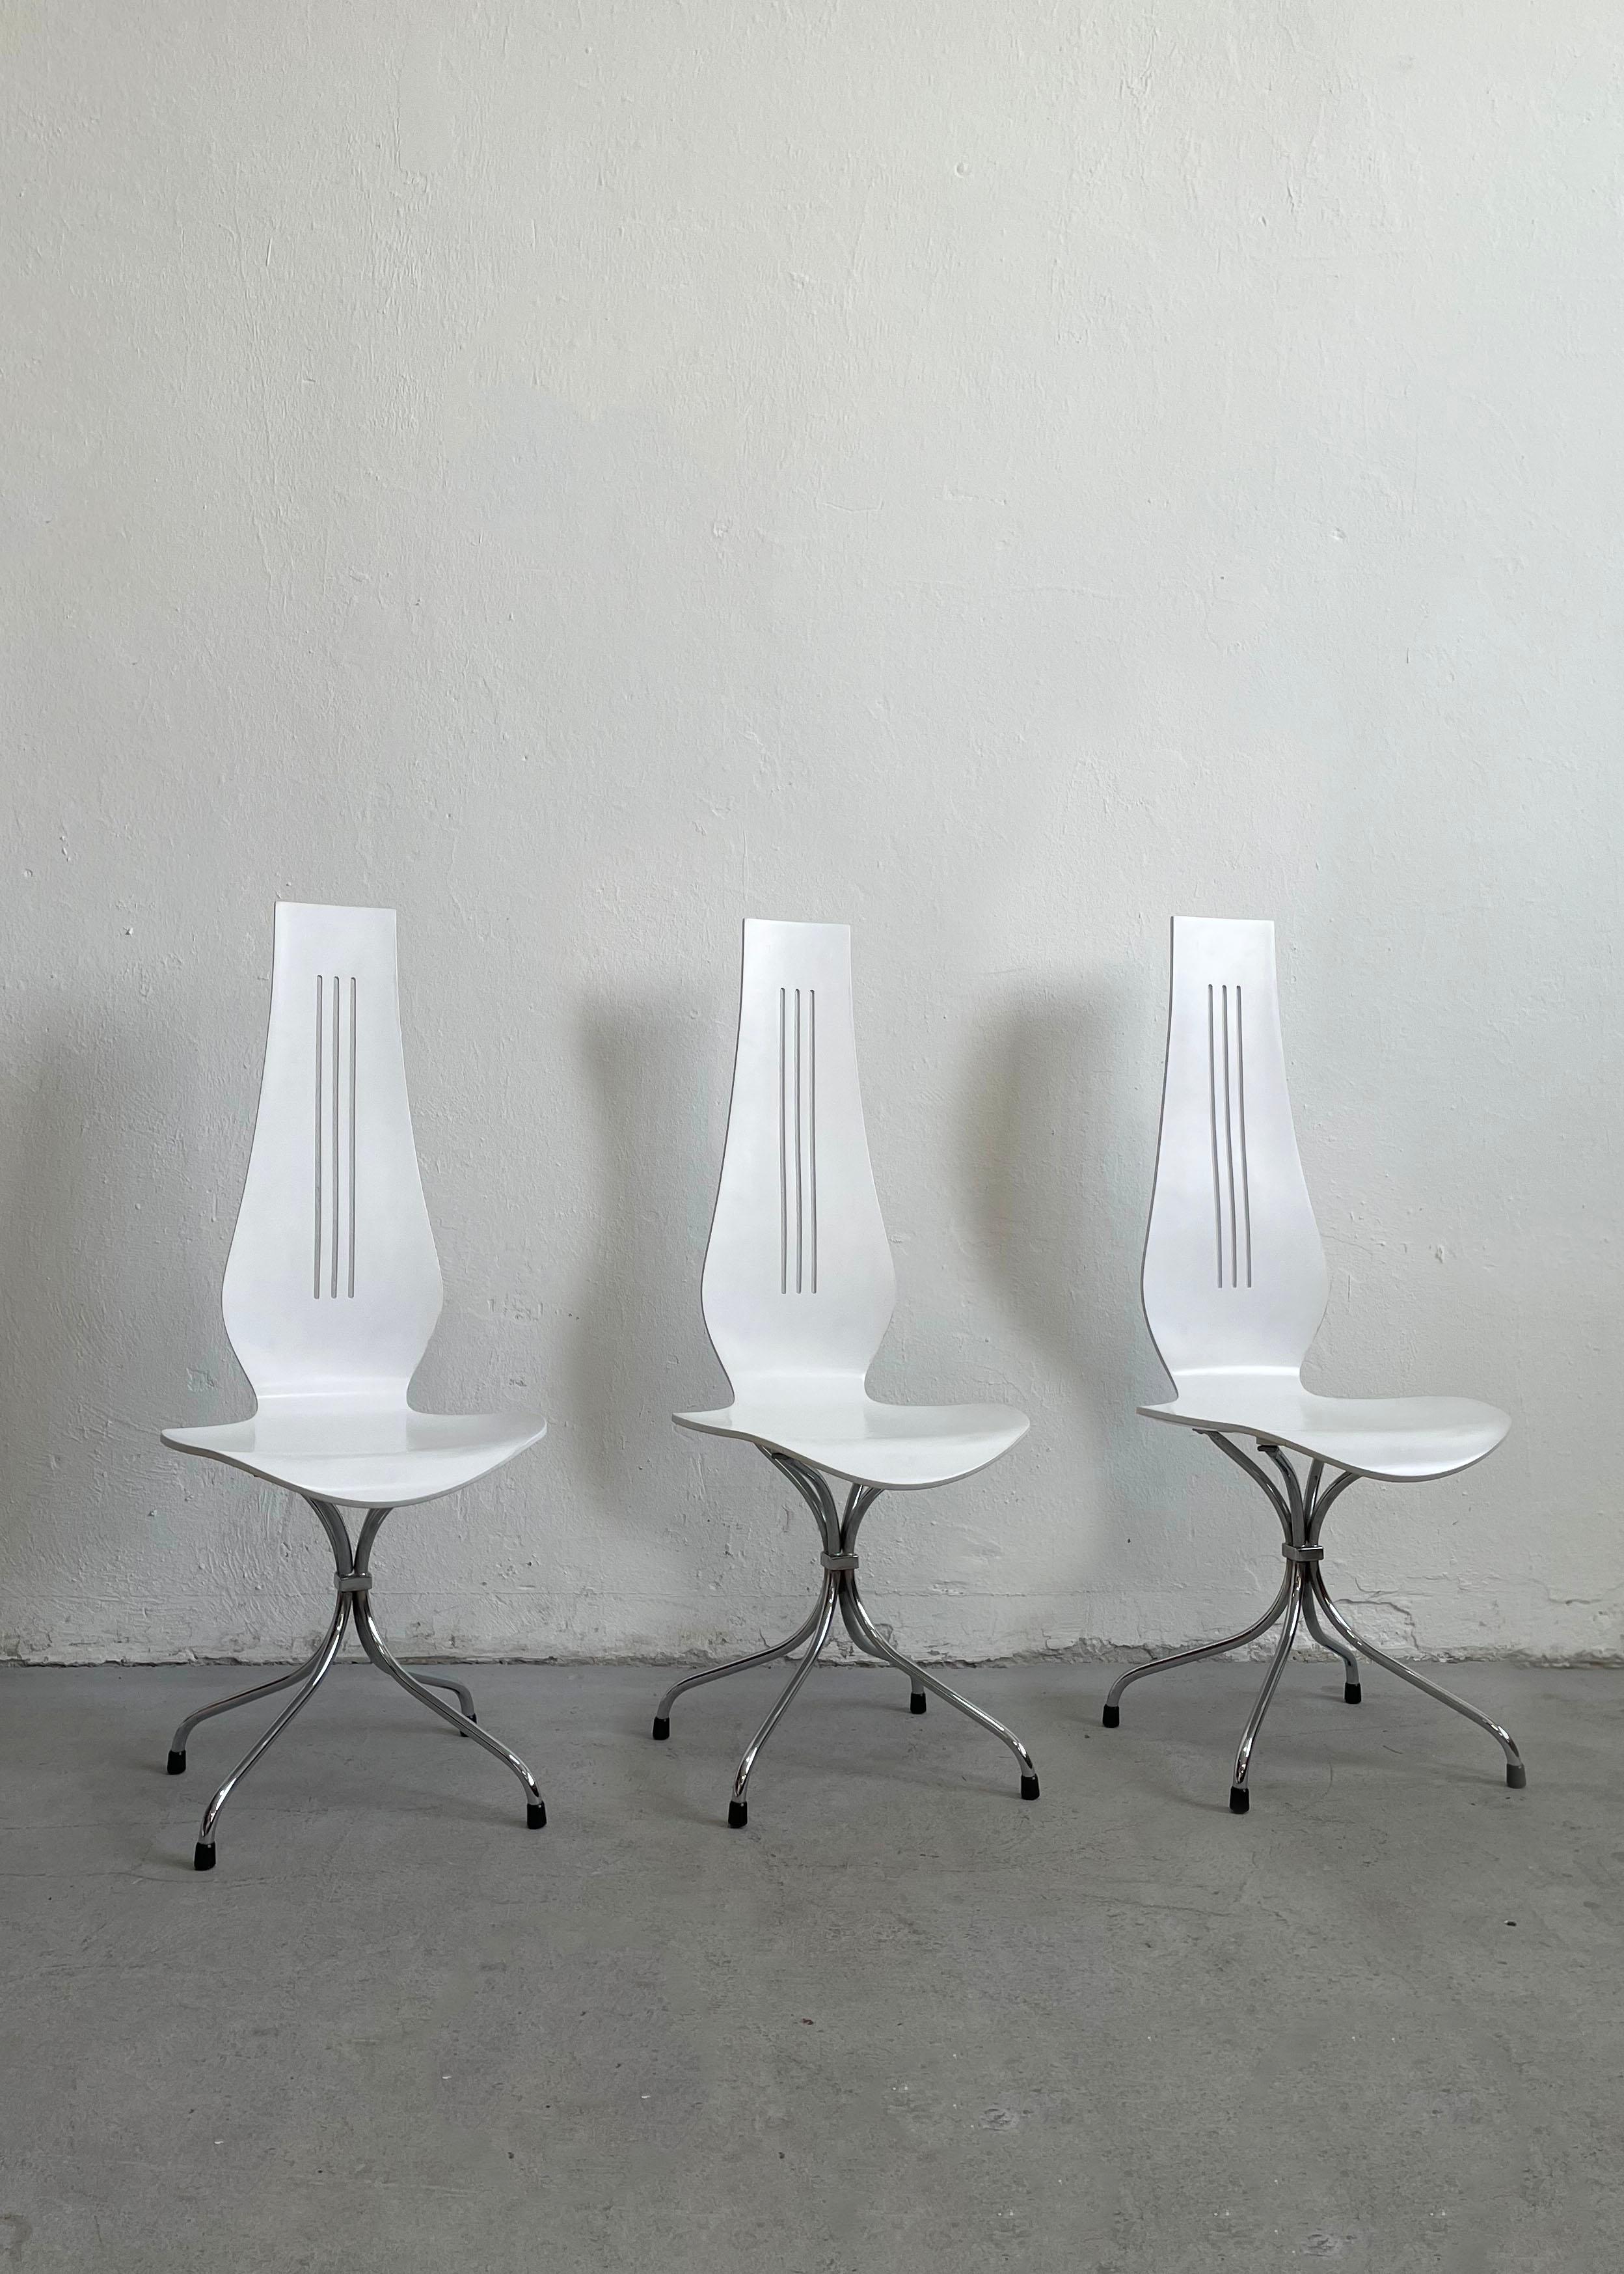 Set of 6 Mid-Century Modern White Dining Chairs by Theo Häberli 1960 Switzerland In Good Condition For Sale In Zagreb, HR